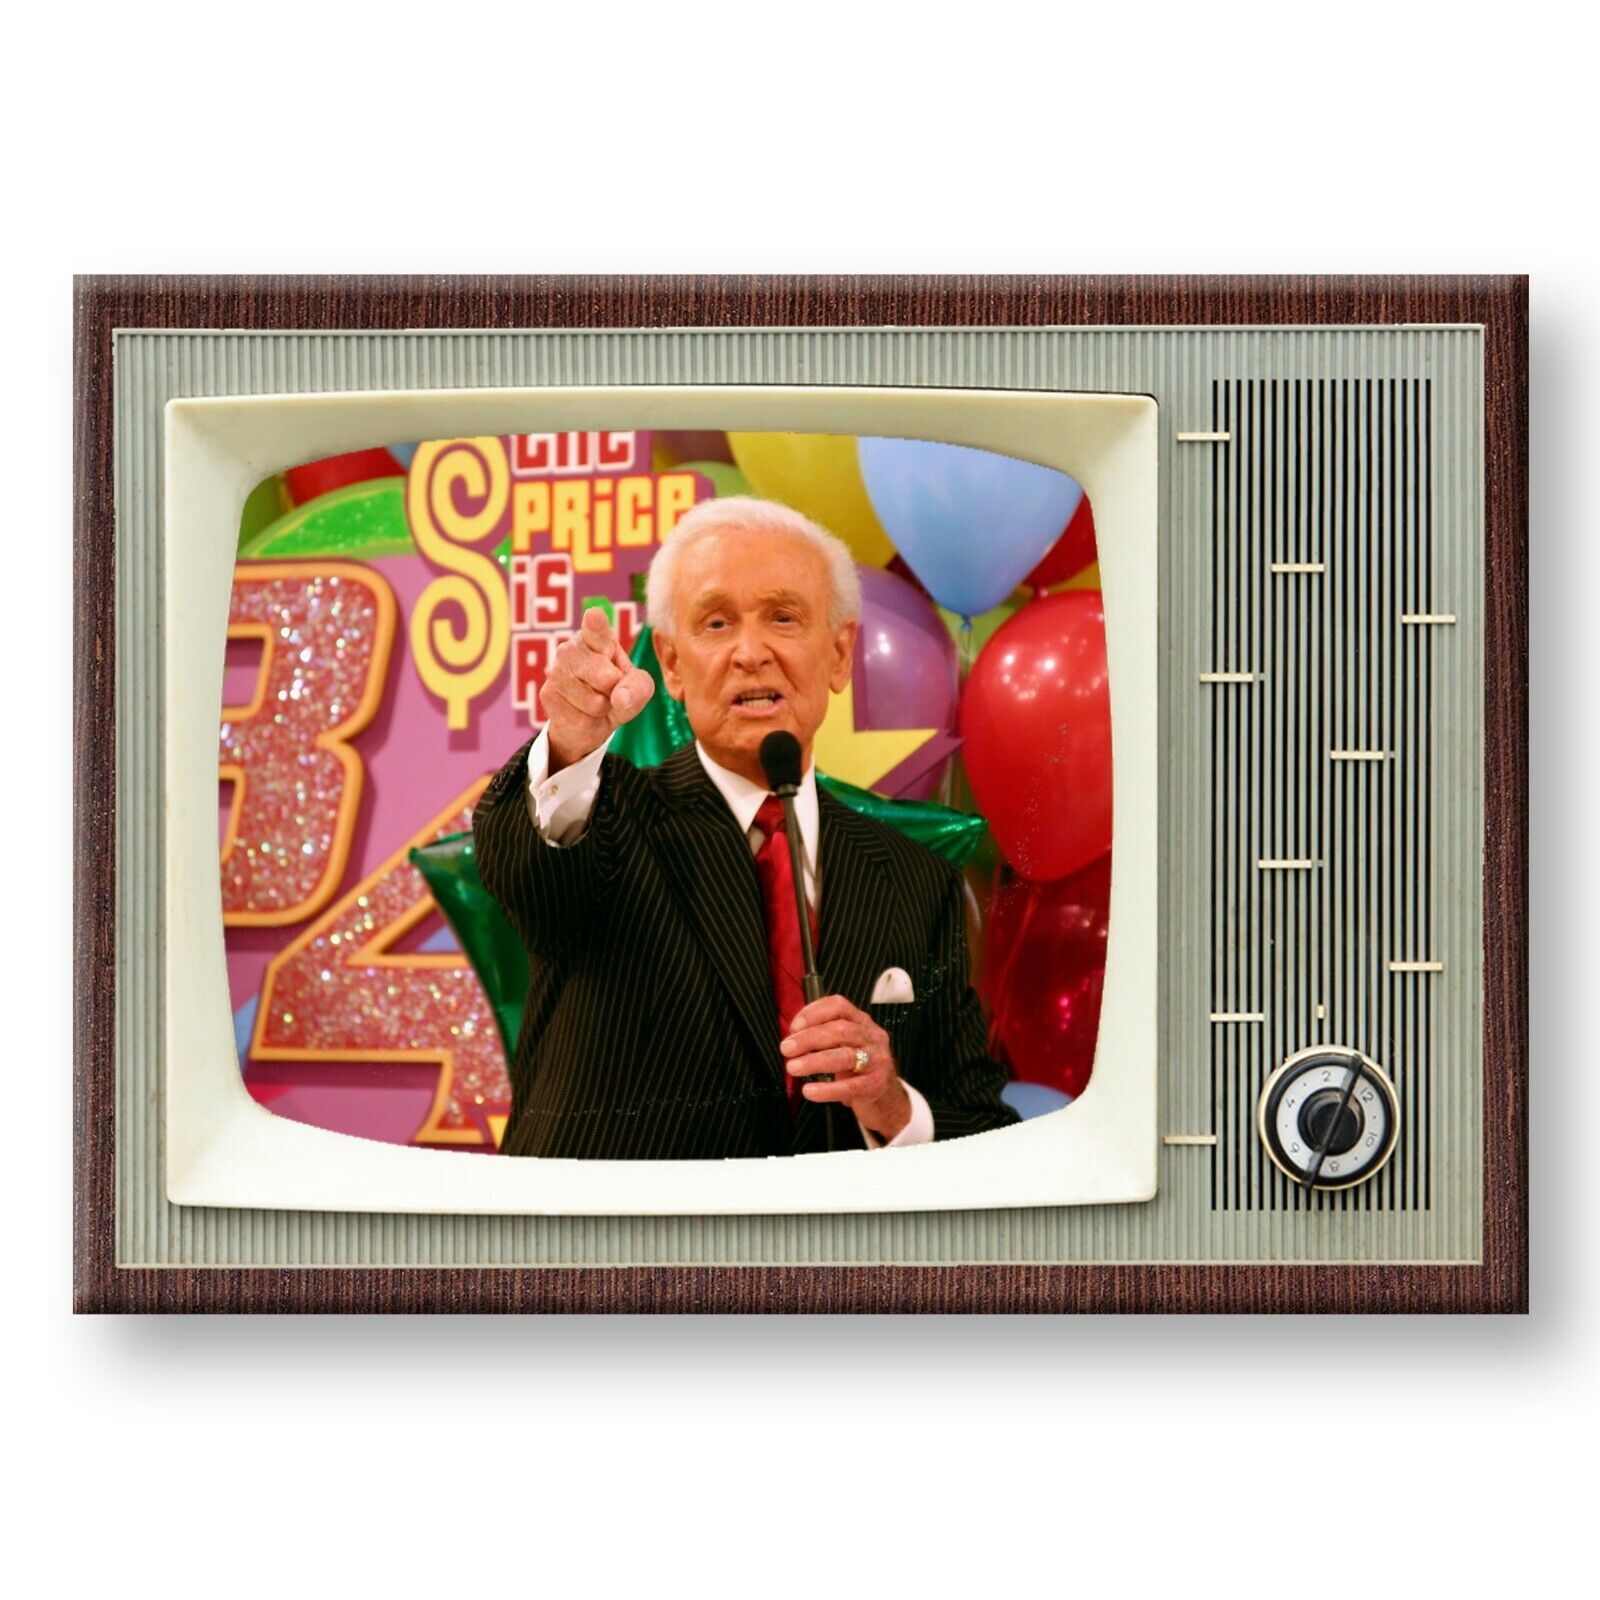 THE PRICE IS RIGHT Classic TV 3.5 inches x 2.5 inches Steel Cased FRIDGE MAGNET